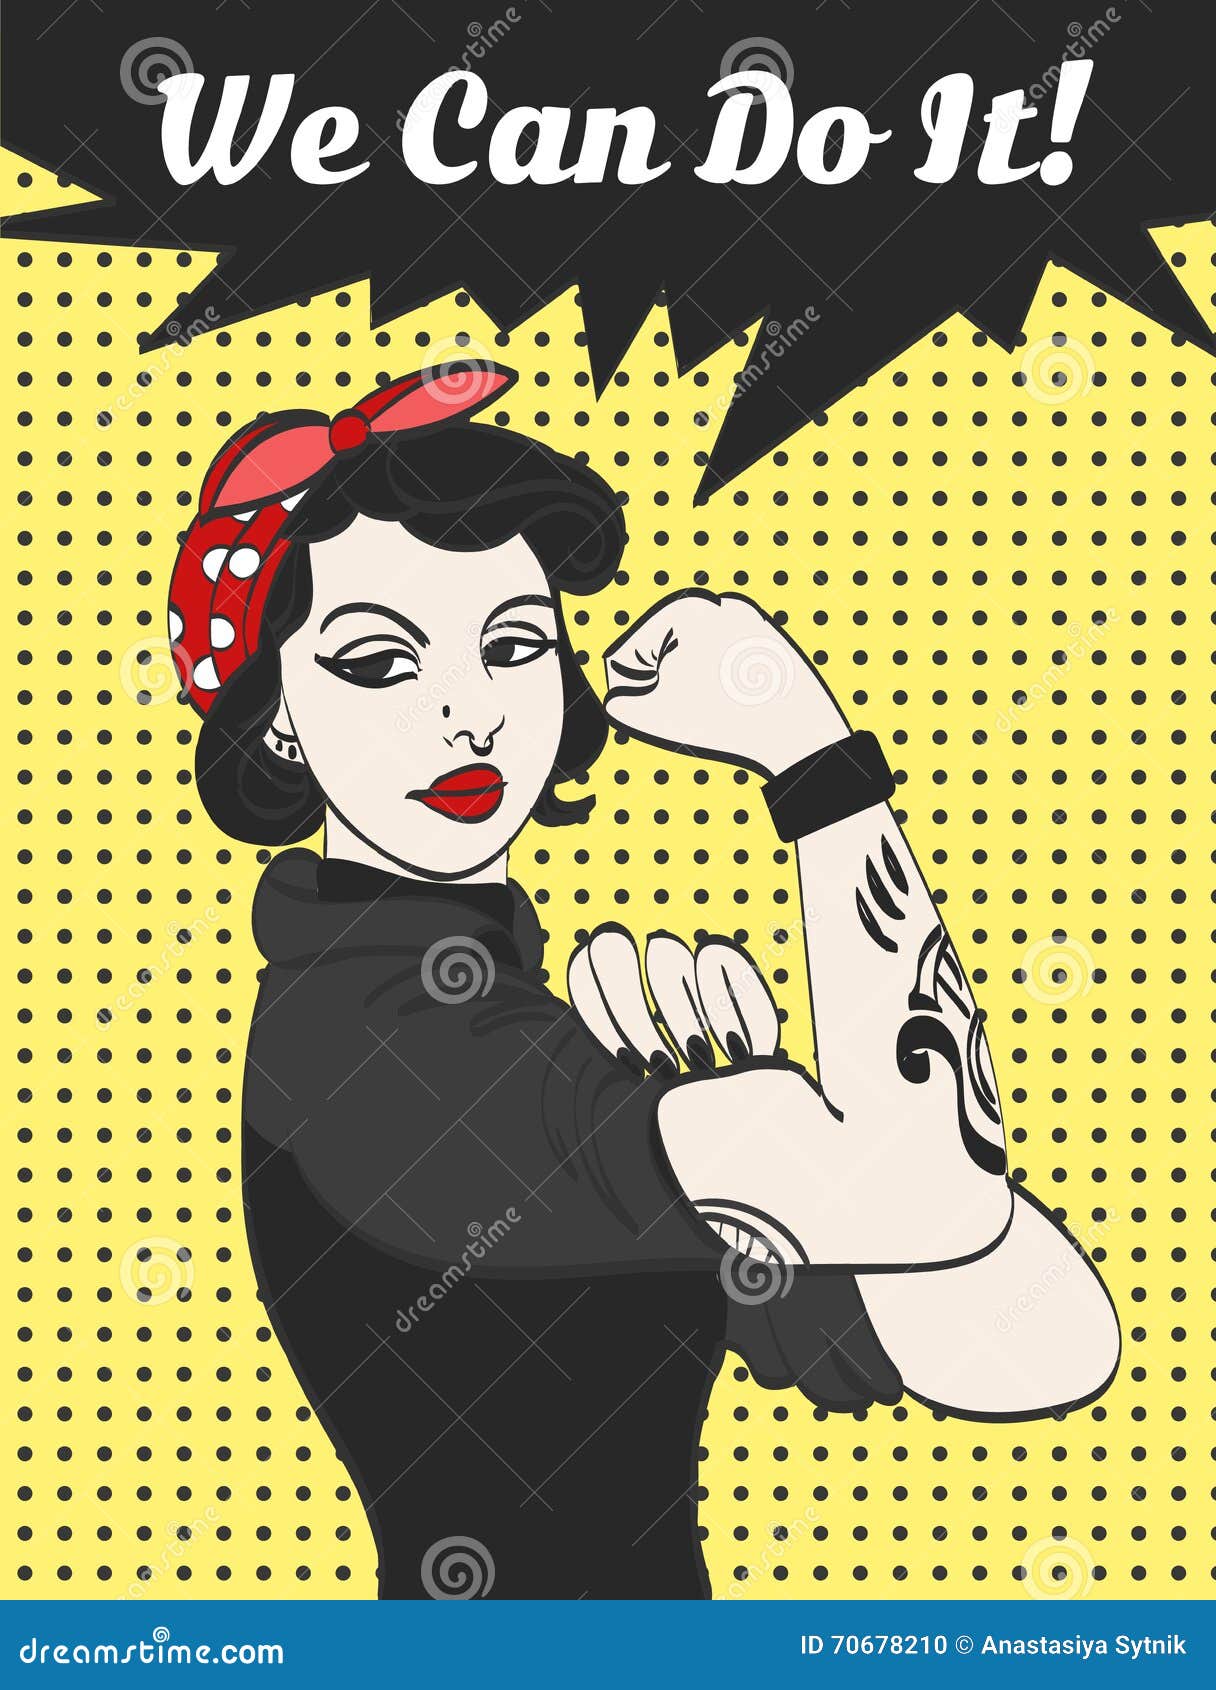  subculture punk gothic woman with signature we can do it